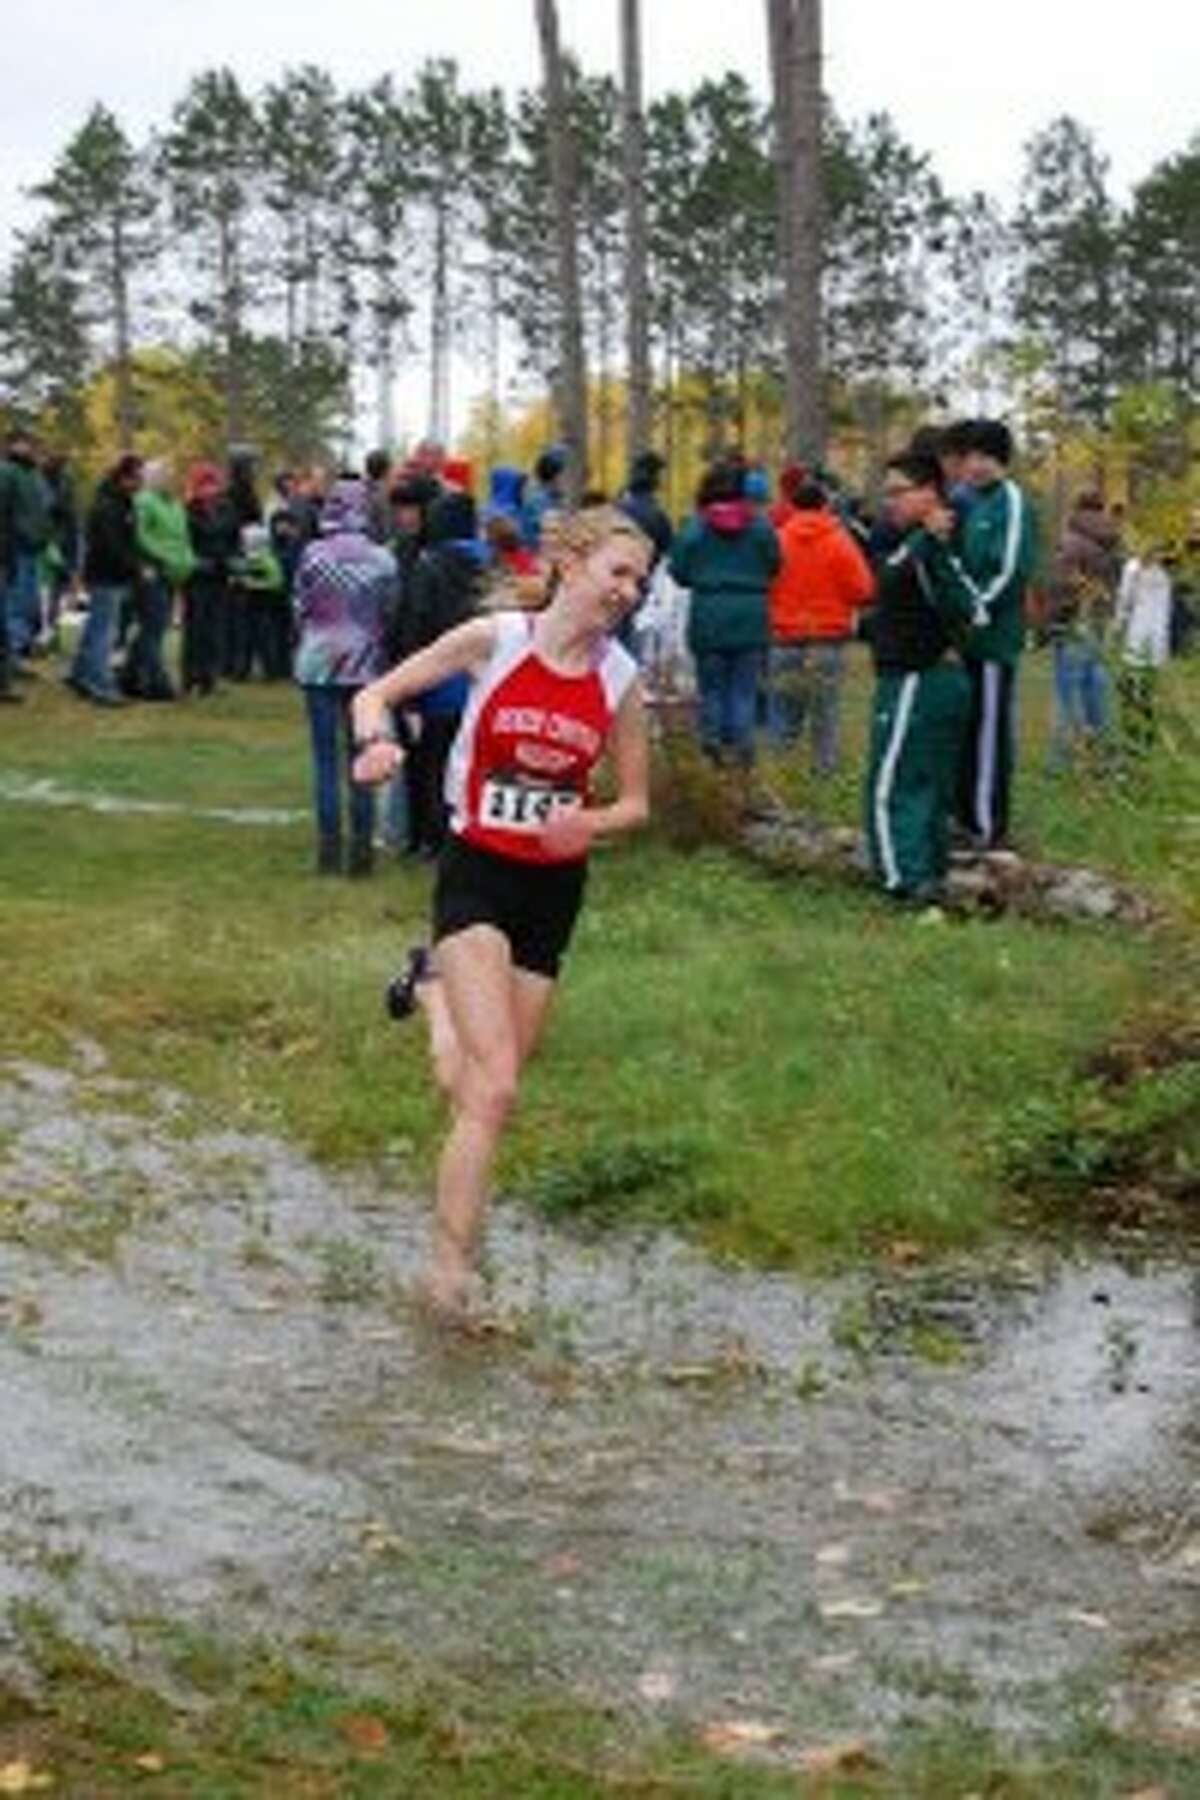 BATTLING THE ELEMENTS: Benzie junior Stephanie Schaub races through a large puddle at the two-mile mark on the course on the way to her fifth place overall finish. The Huskies had to battle through some tough weather during the Manistee National meet. (Courtesy Photo)